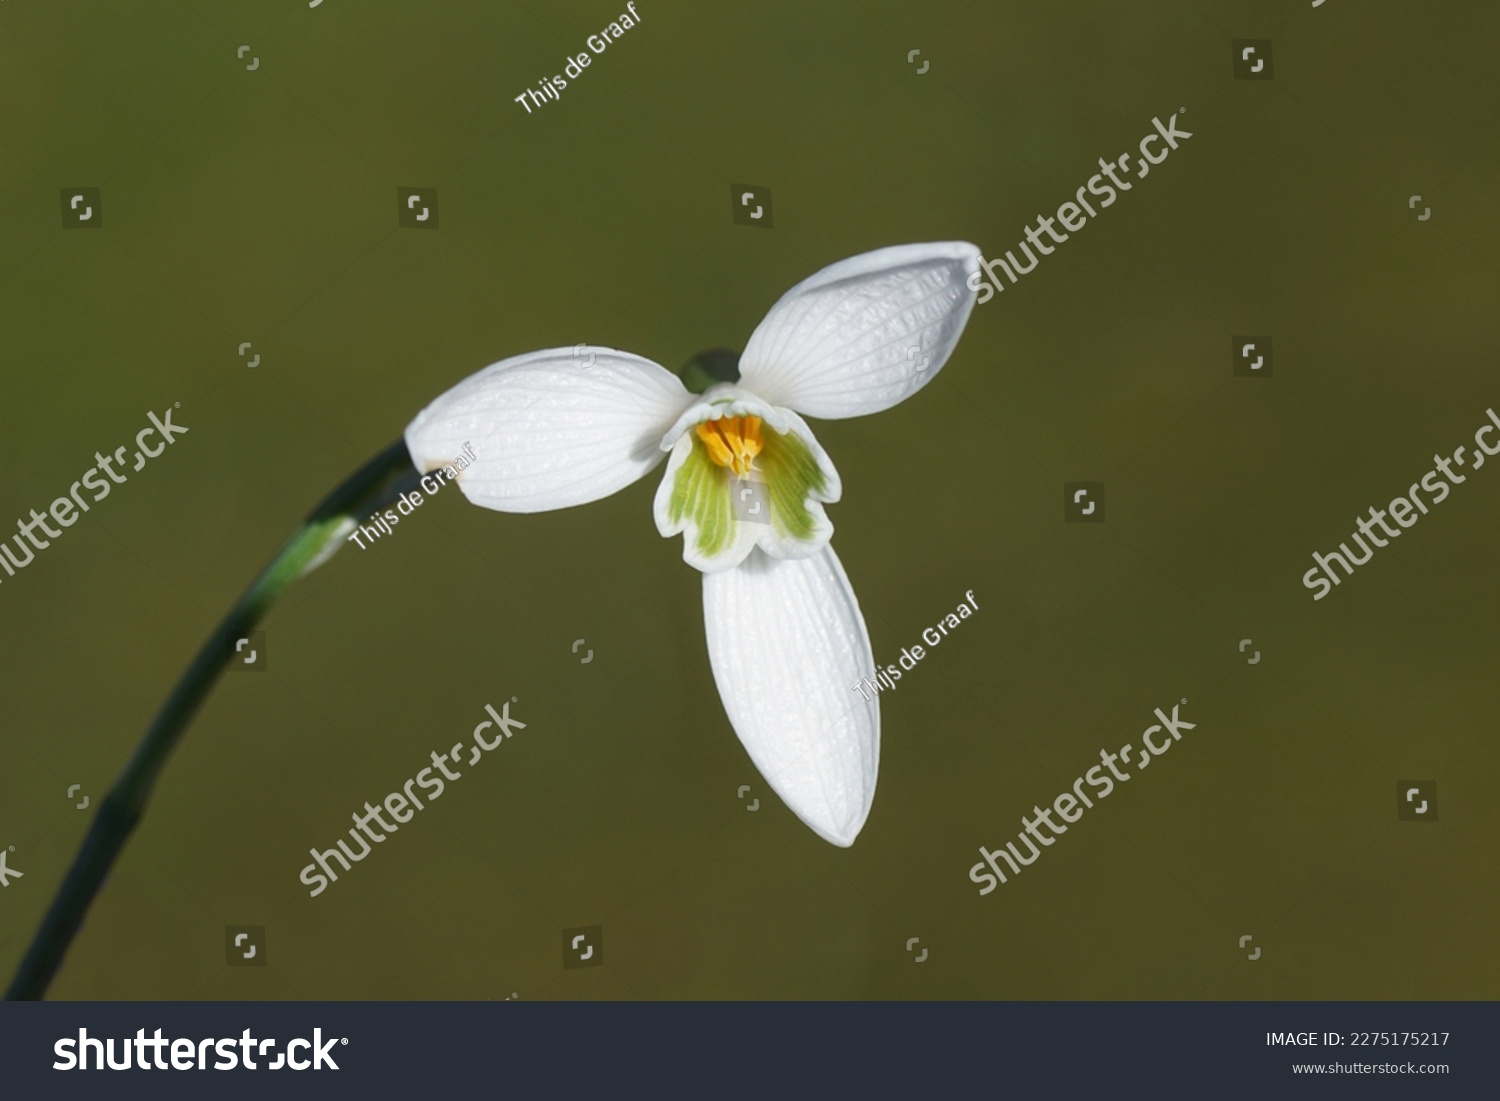 Closeup flower, stamens and pistil of common snowdrop (Galanthus nivalis). Faded green lawn in the background. Bulbous perennial herbaceous plants, family Amaryllidaceae. Winter, March, Netherlands    #2275175217